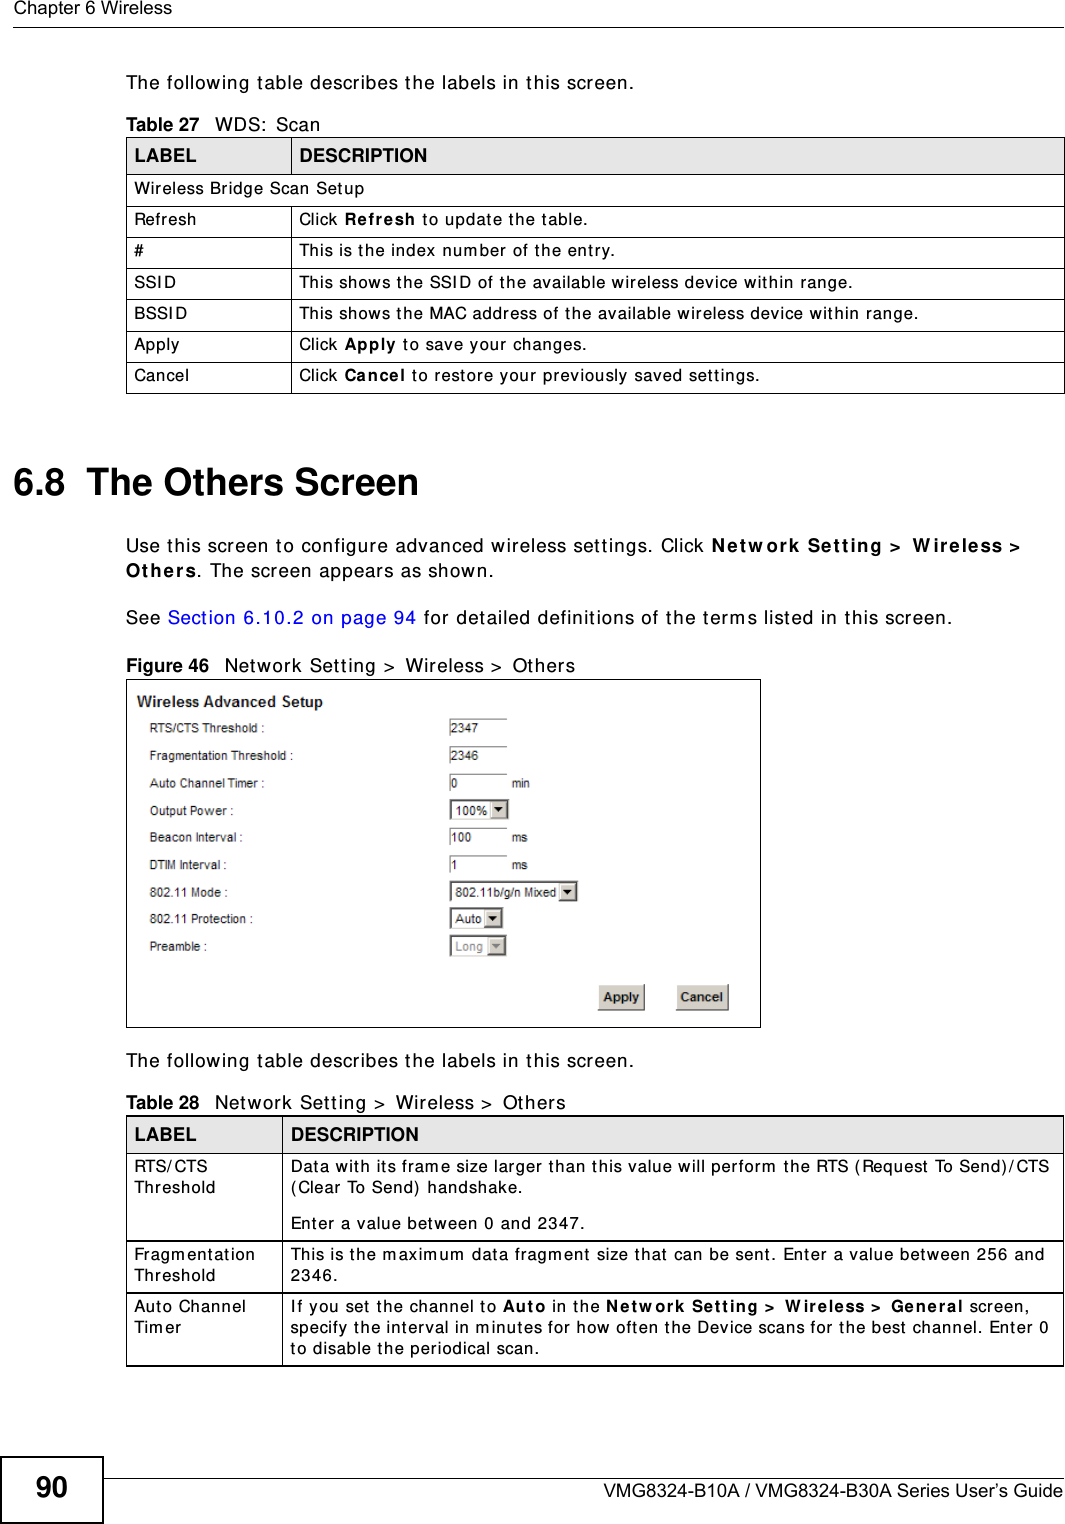 Chapter 6 WirelessVMG8324-B10A / VMG8324-B30A Series User’s Guide90The following t able describes t he labels in this screen.6.8  The Others ScreenUse t his screen t o configure advanced wireless set t ings. Click N e t w or k Se t t ing &gt;  W ireless &gt;  Ot h er s. The screen appears as shown.See Sect ion 6.10.2 on page 94 for detailed definit ions of t he term s listed in t his scr een.Figure 46   Net work Set t ing &gt;  Wireless &gt;  Ot hersThe following t able describes t he labels in this screen. Table 27   WDS:  ScanLABEL DESCRIPTIONWireless Bridge Scan SetupRefresh Click Refr esh  t o updat e t he t able. # This is t he index  num ber of the ent ry.SSI D This shows t he SSI D of t he available wir eless dev ice wit hin range.BSSI D This show s t he MAC address of t he available wireless device wit hin range.Apply Click Apply t o save your  changes.Cancel Click Cancel t o r est ore your previously saved set t ings.Table 28   Net work Set t ing &gt;  Wireless &gt;  Other sLABEL DESCRIPTIONRTS/ CTS ThresholdDat a wit h it s fram e size larger t han t his value will perform  t he RTS ( Request  To Send) / CTS ( Clear To Send)  handshake. Enter a value bet ween 0 and 2347. Fragm ent ation ThresholdThis is the m ax im um  data fragm ent  size that can be sent. Enter a value bet ween 256 and 2346. Aut o Channel Tim erI f you set t he channel to Au t o in the N e t w ork Set t ing &gt;  W irele ss &gt;  Ge n e r a l screen, specify the int erval in m inutes for how  oft en t he Device scans for t he best  channel. Enter 0 to disable the periodical scan.